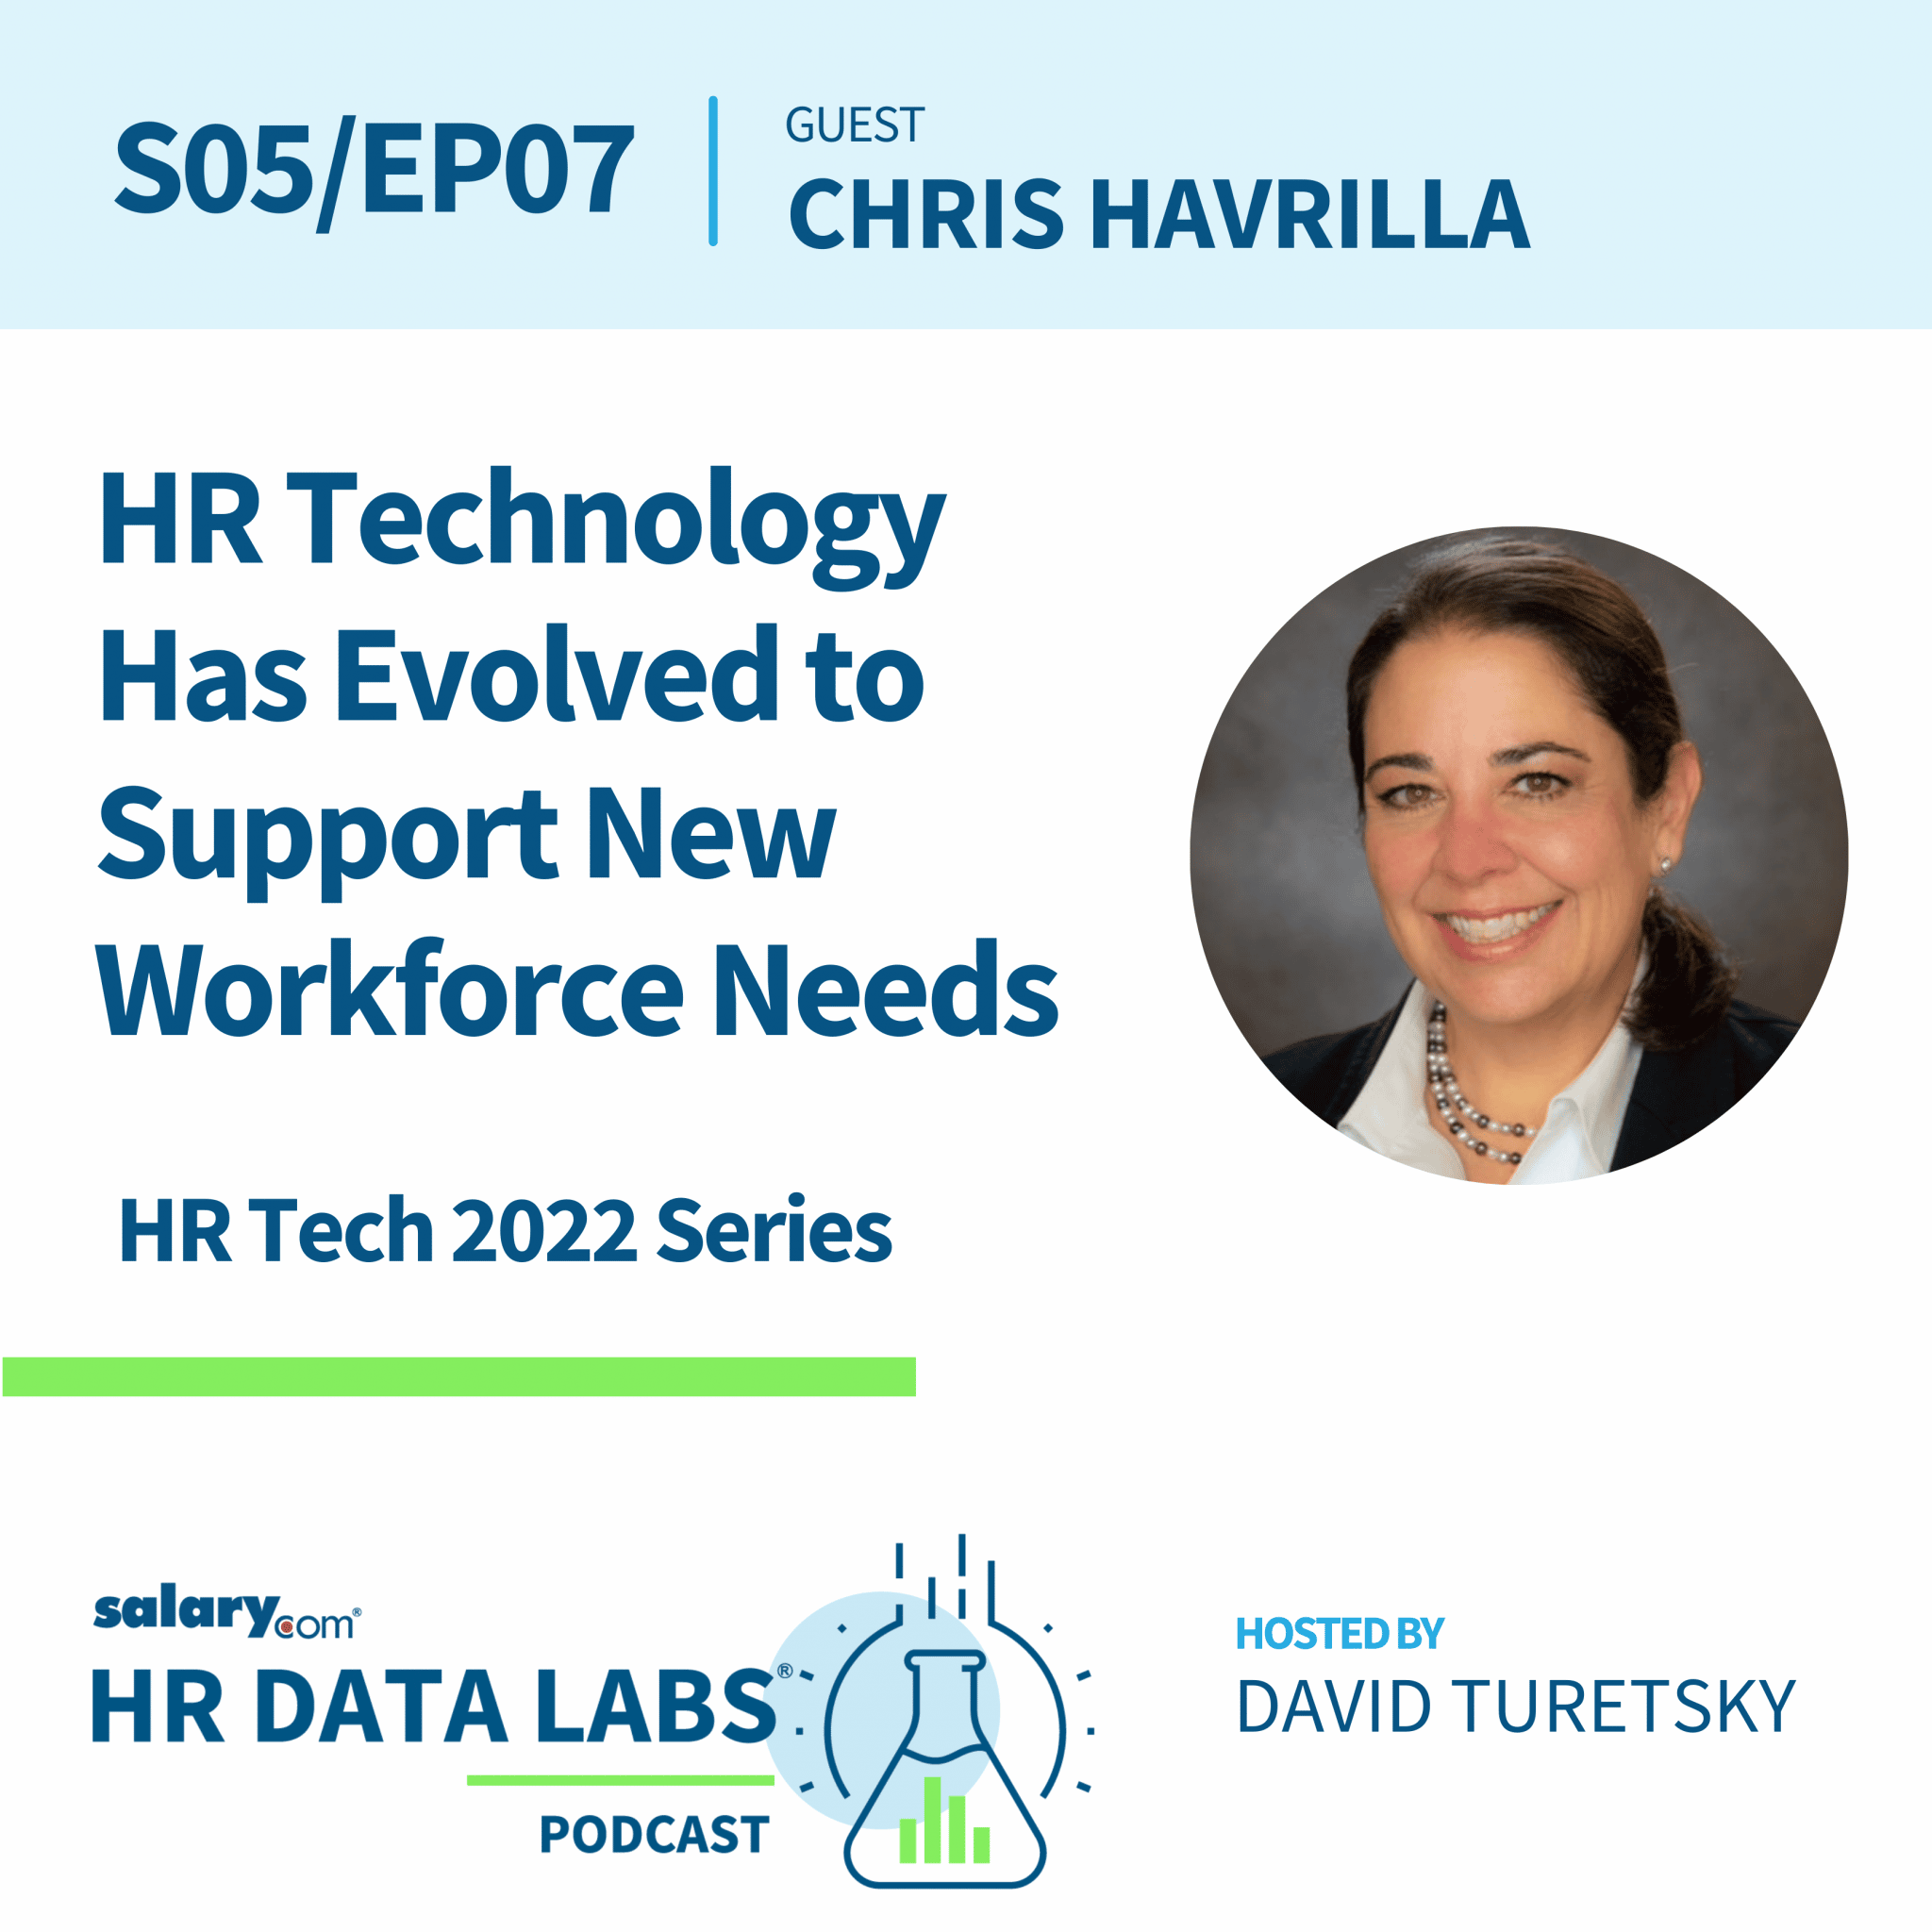 Chris Havrilla – HR Tech 2022 Series – HR Technology Has Evolved to Support New Workforce Needs